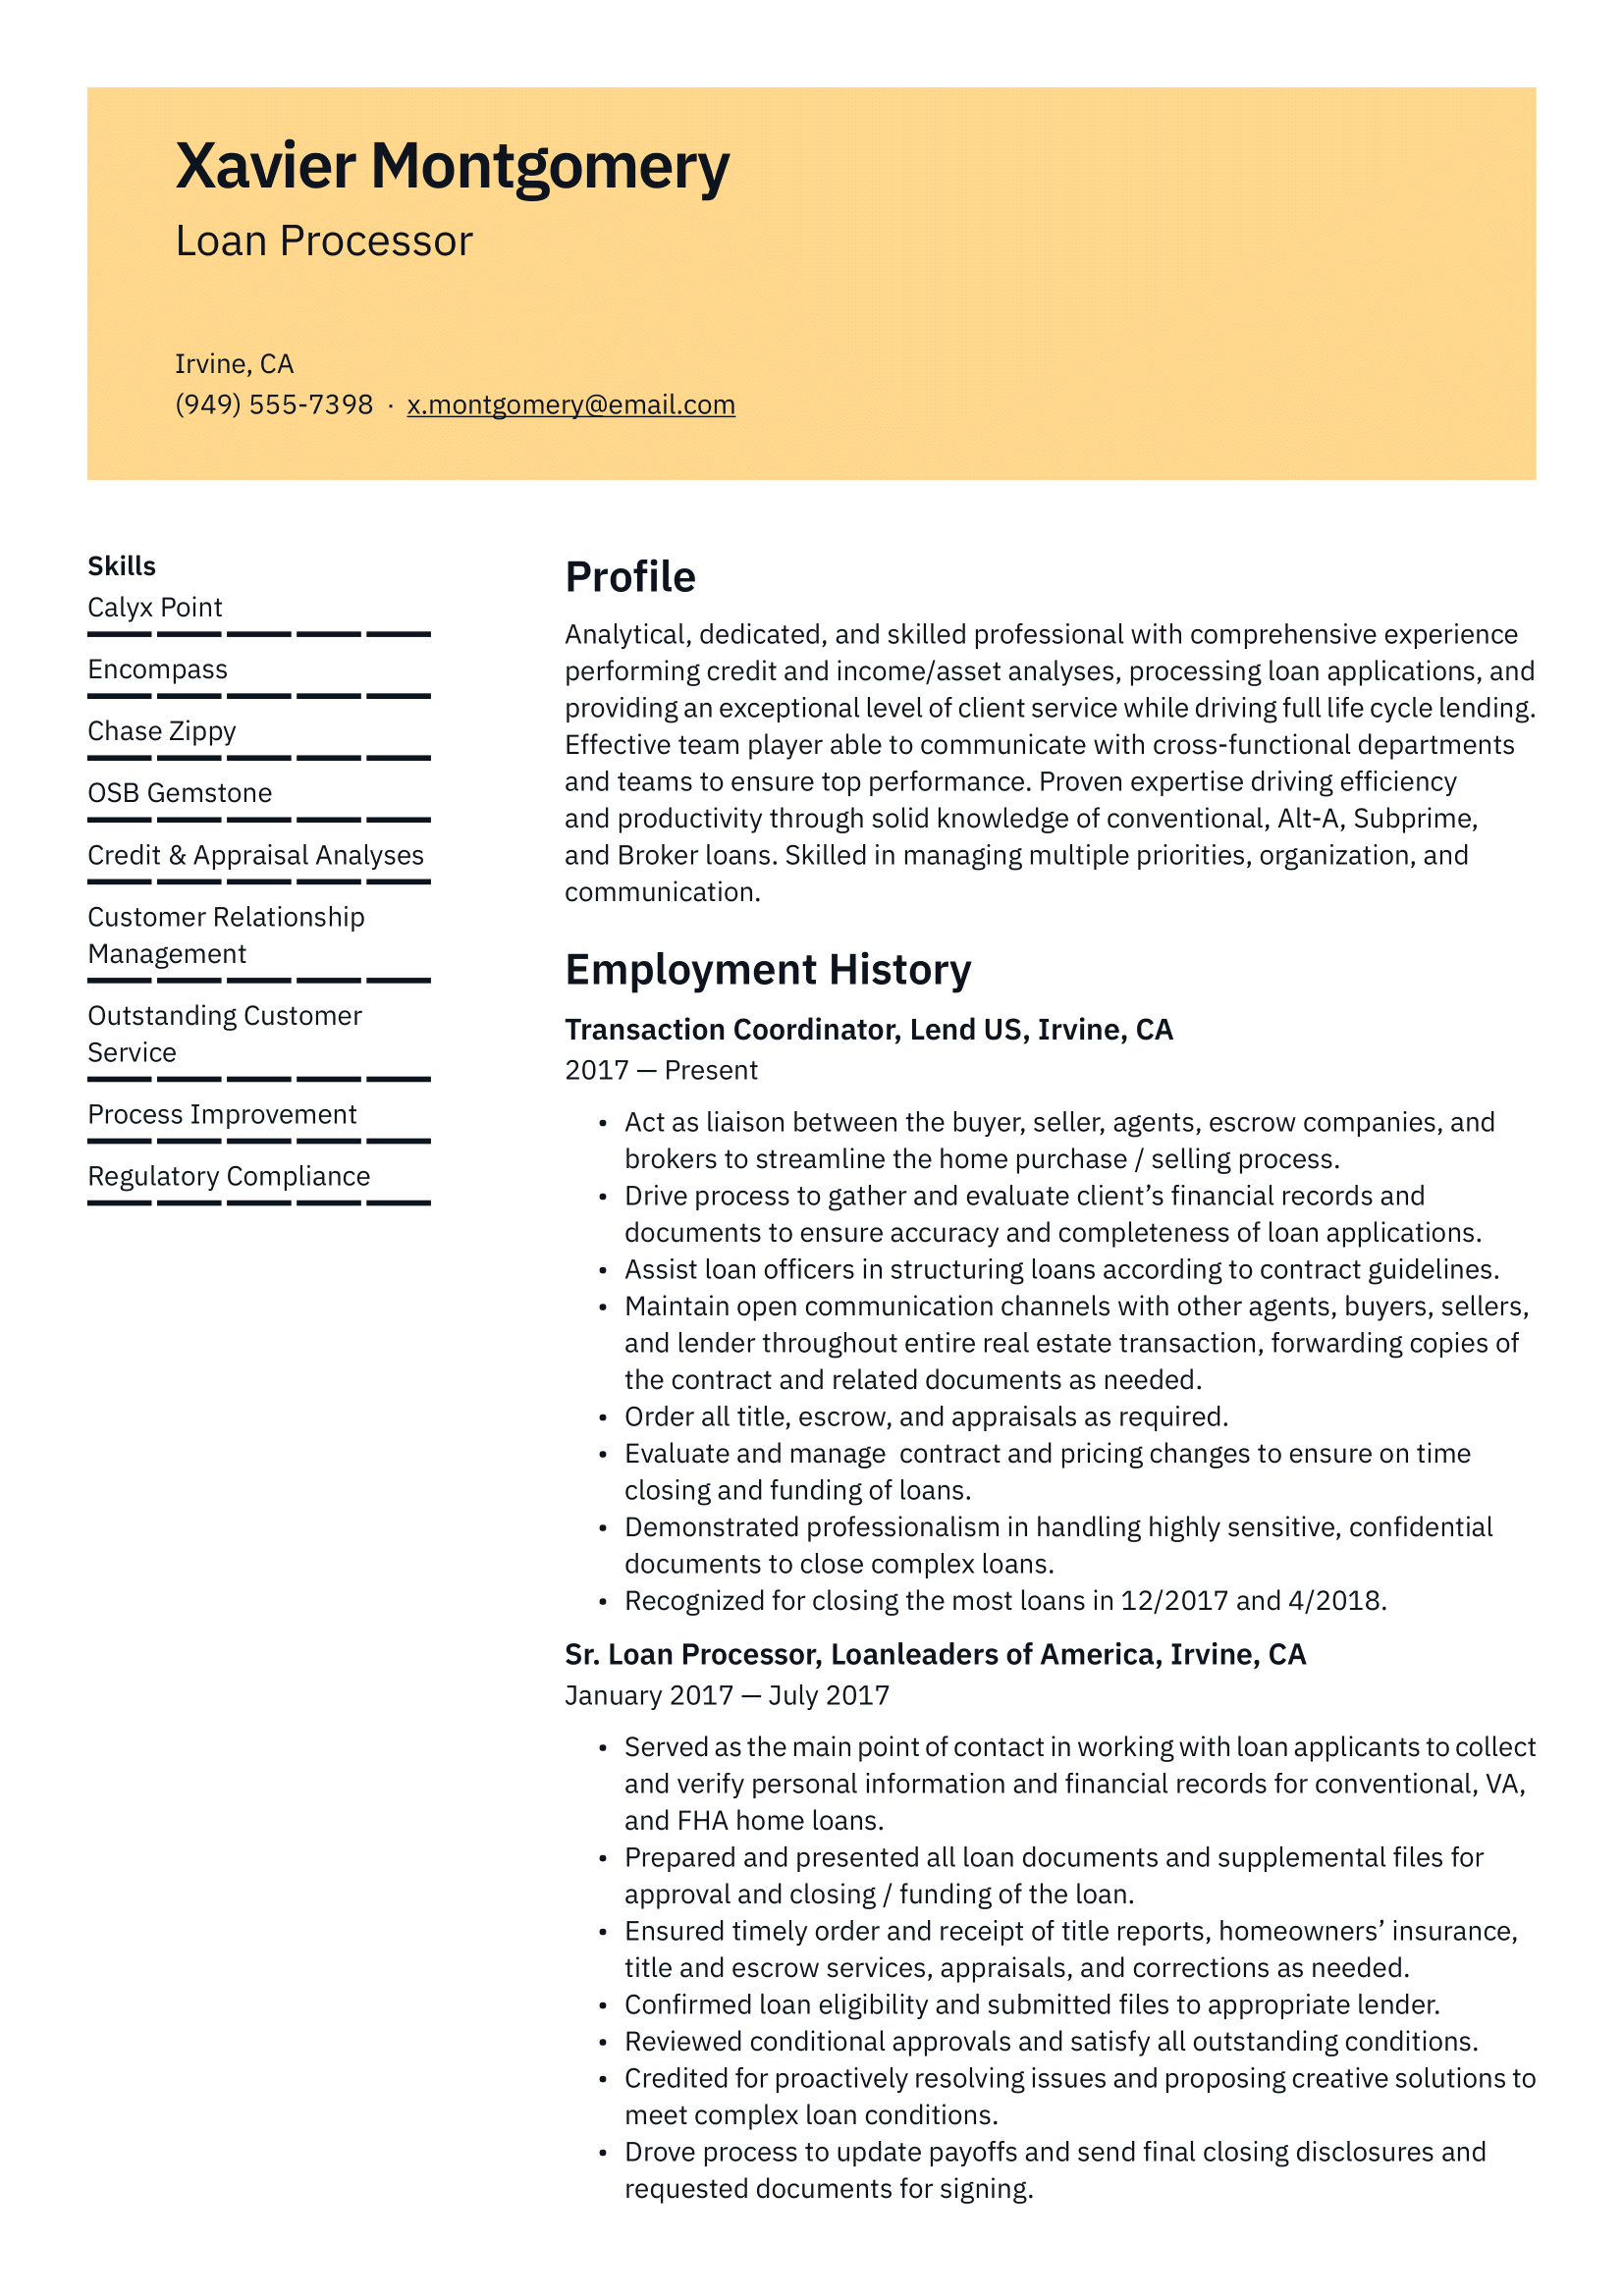 Loan_Processor-Resume-Example.png